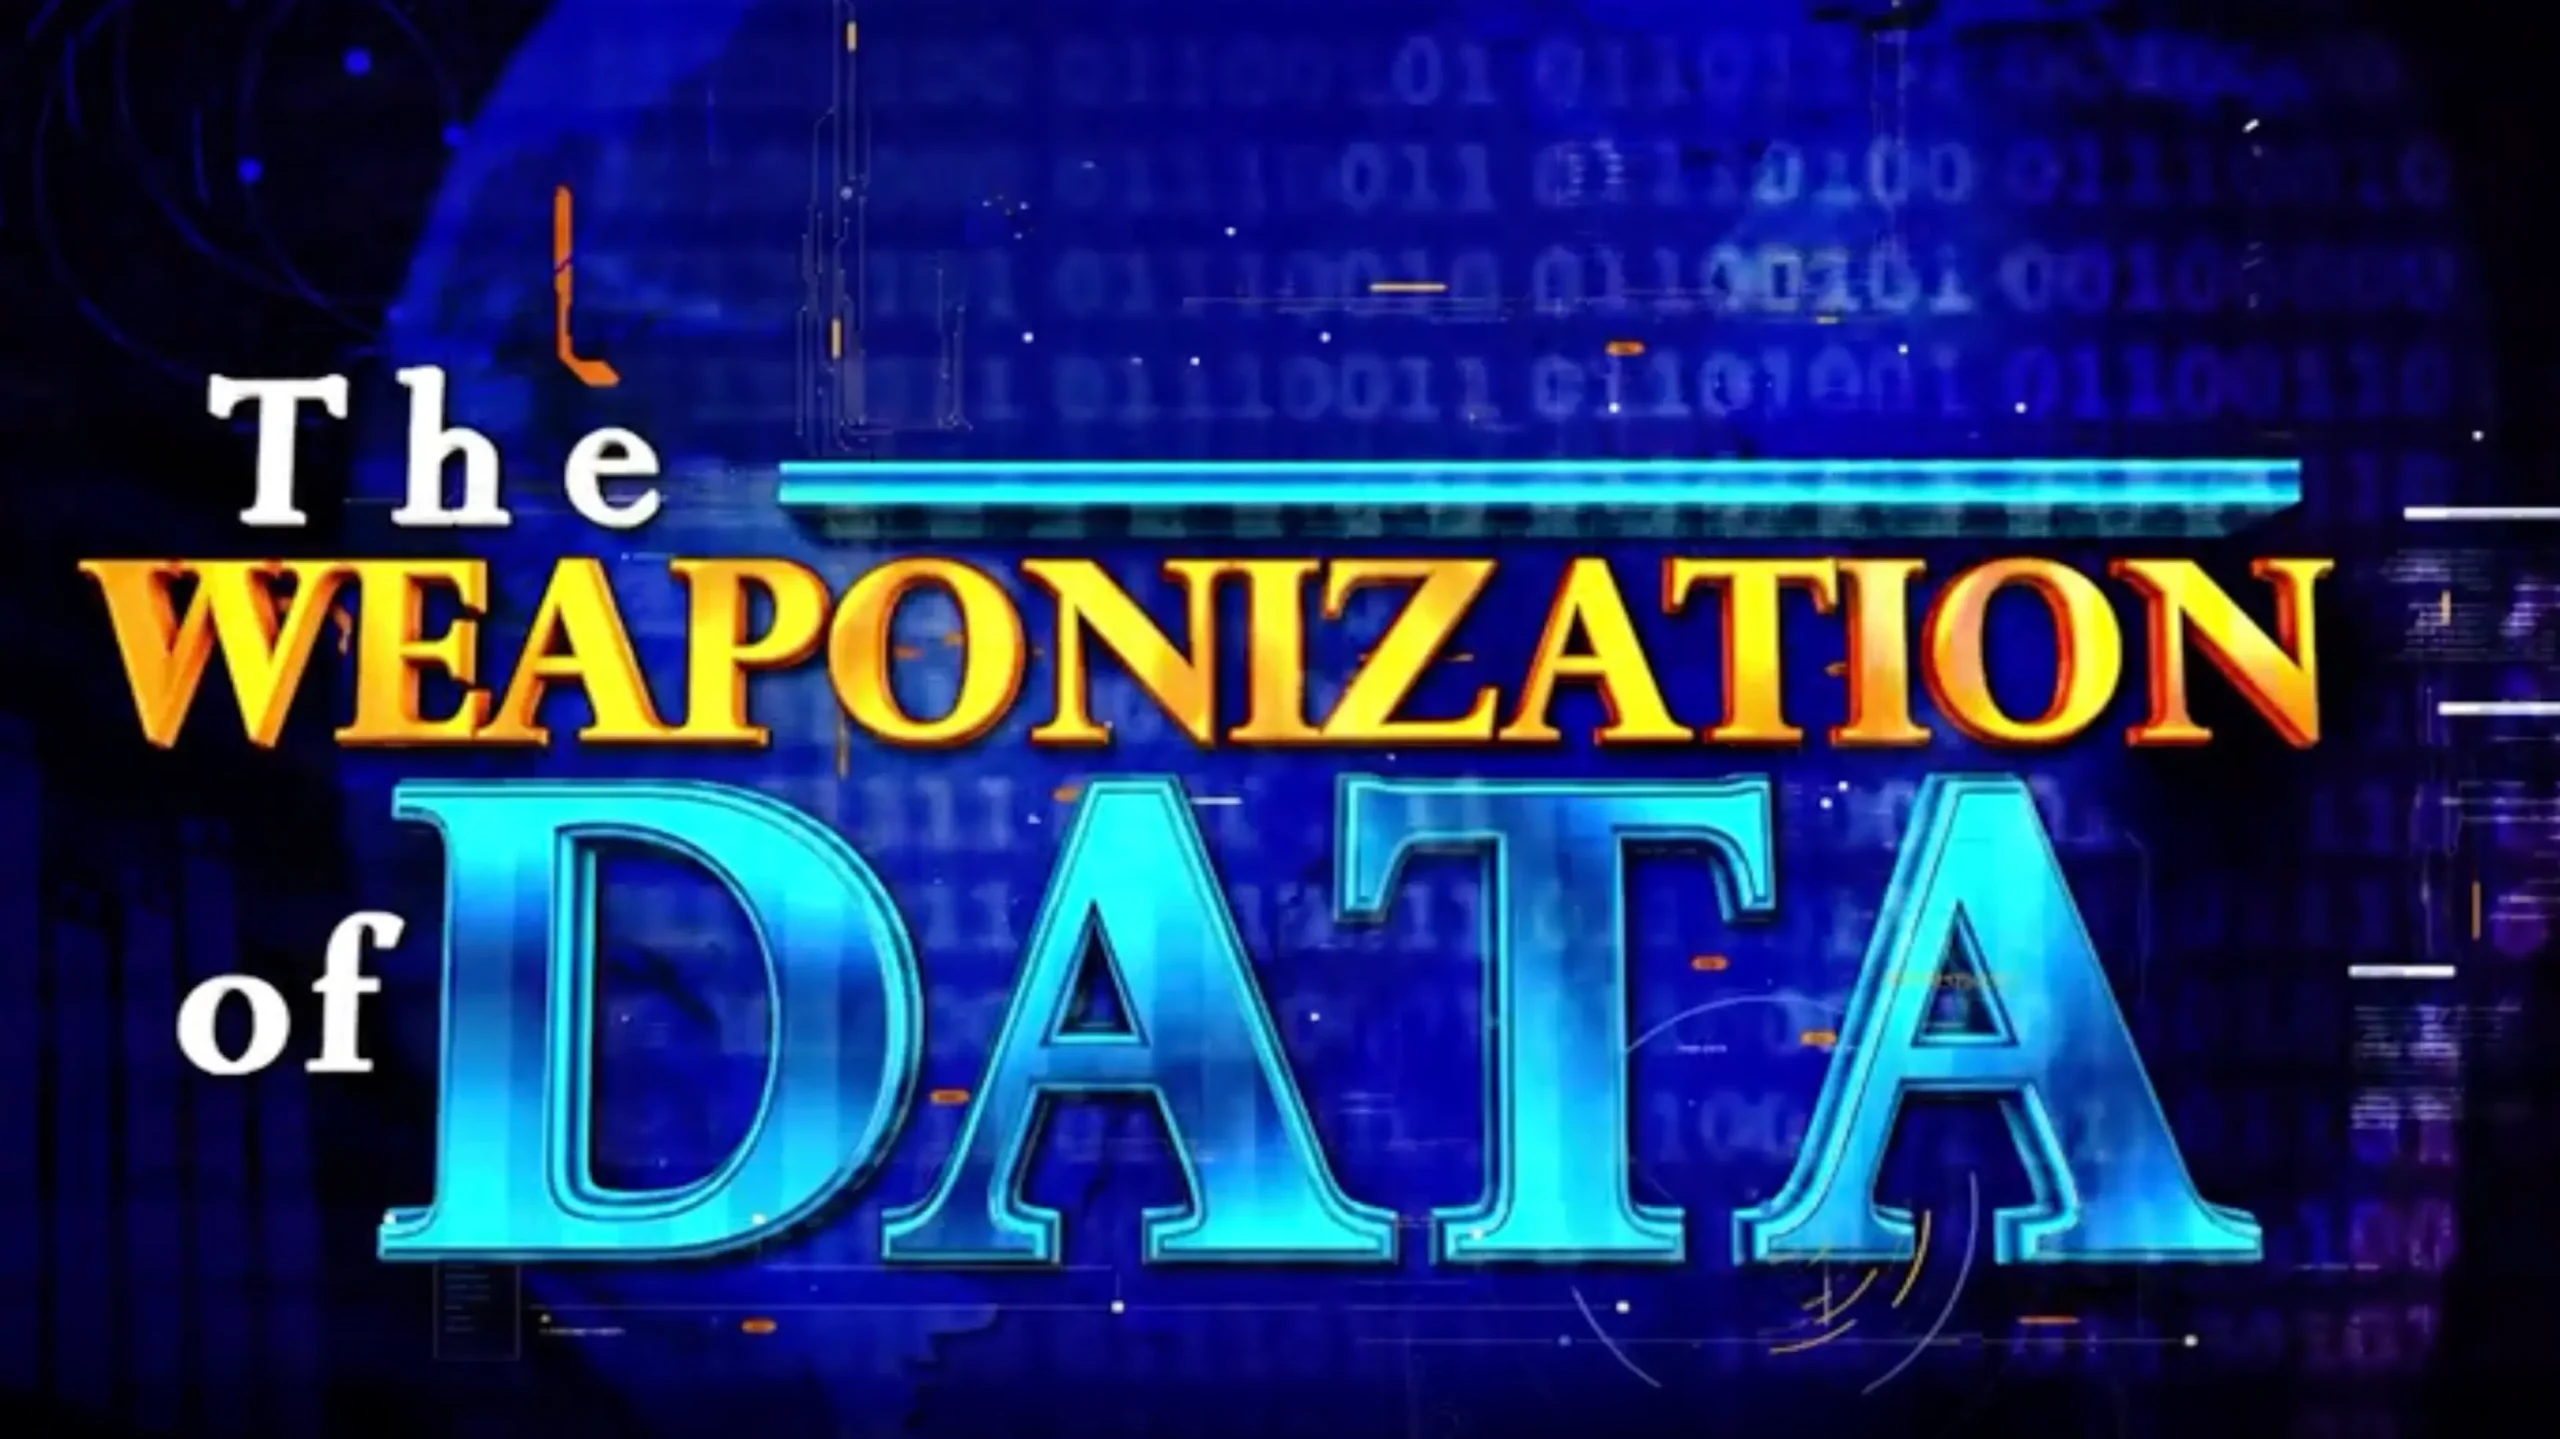 The WEAPONIZATION of DATA